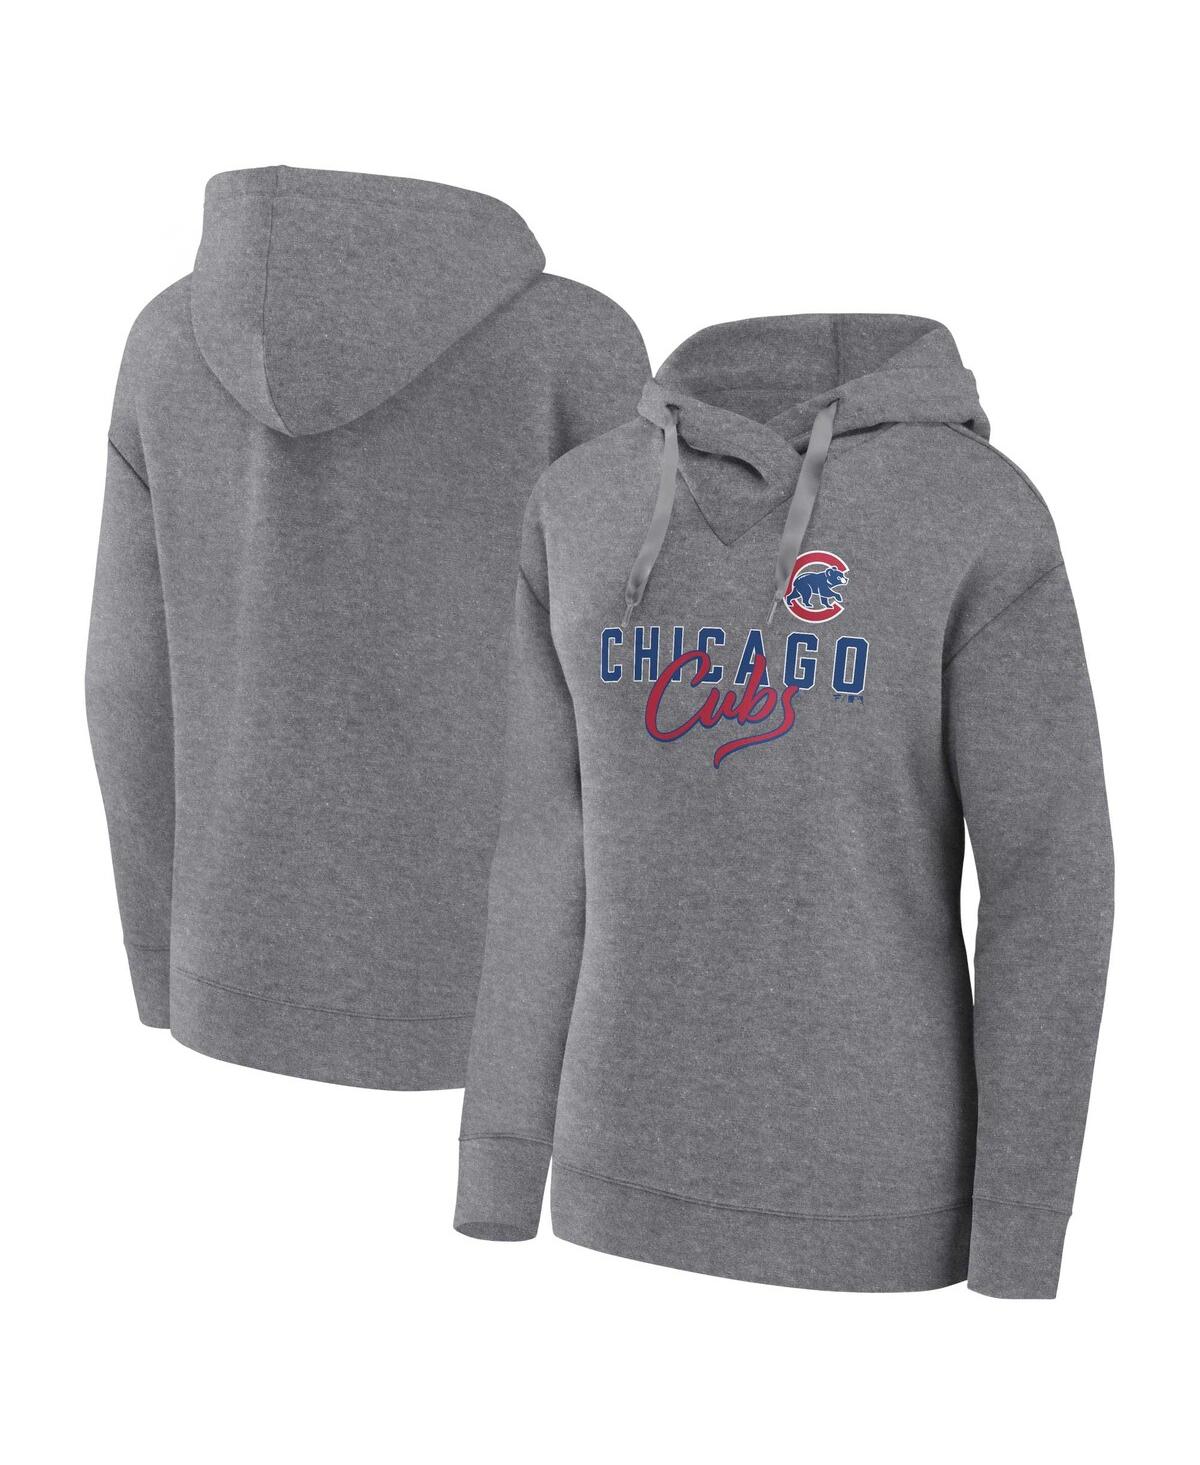 PROFILE WOMEN'S PROFILE HEATHER GRAY CHICAGO CUBS PLUS SIZE PULLOVER HOODIE